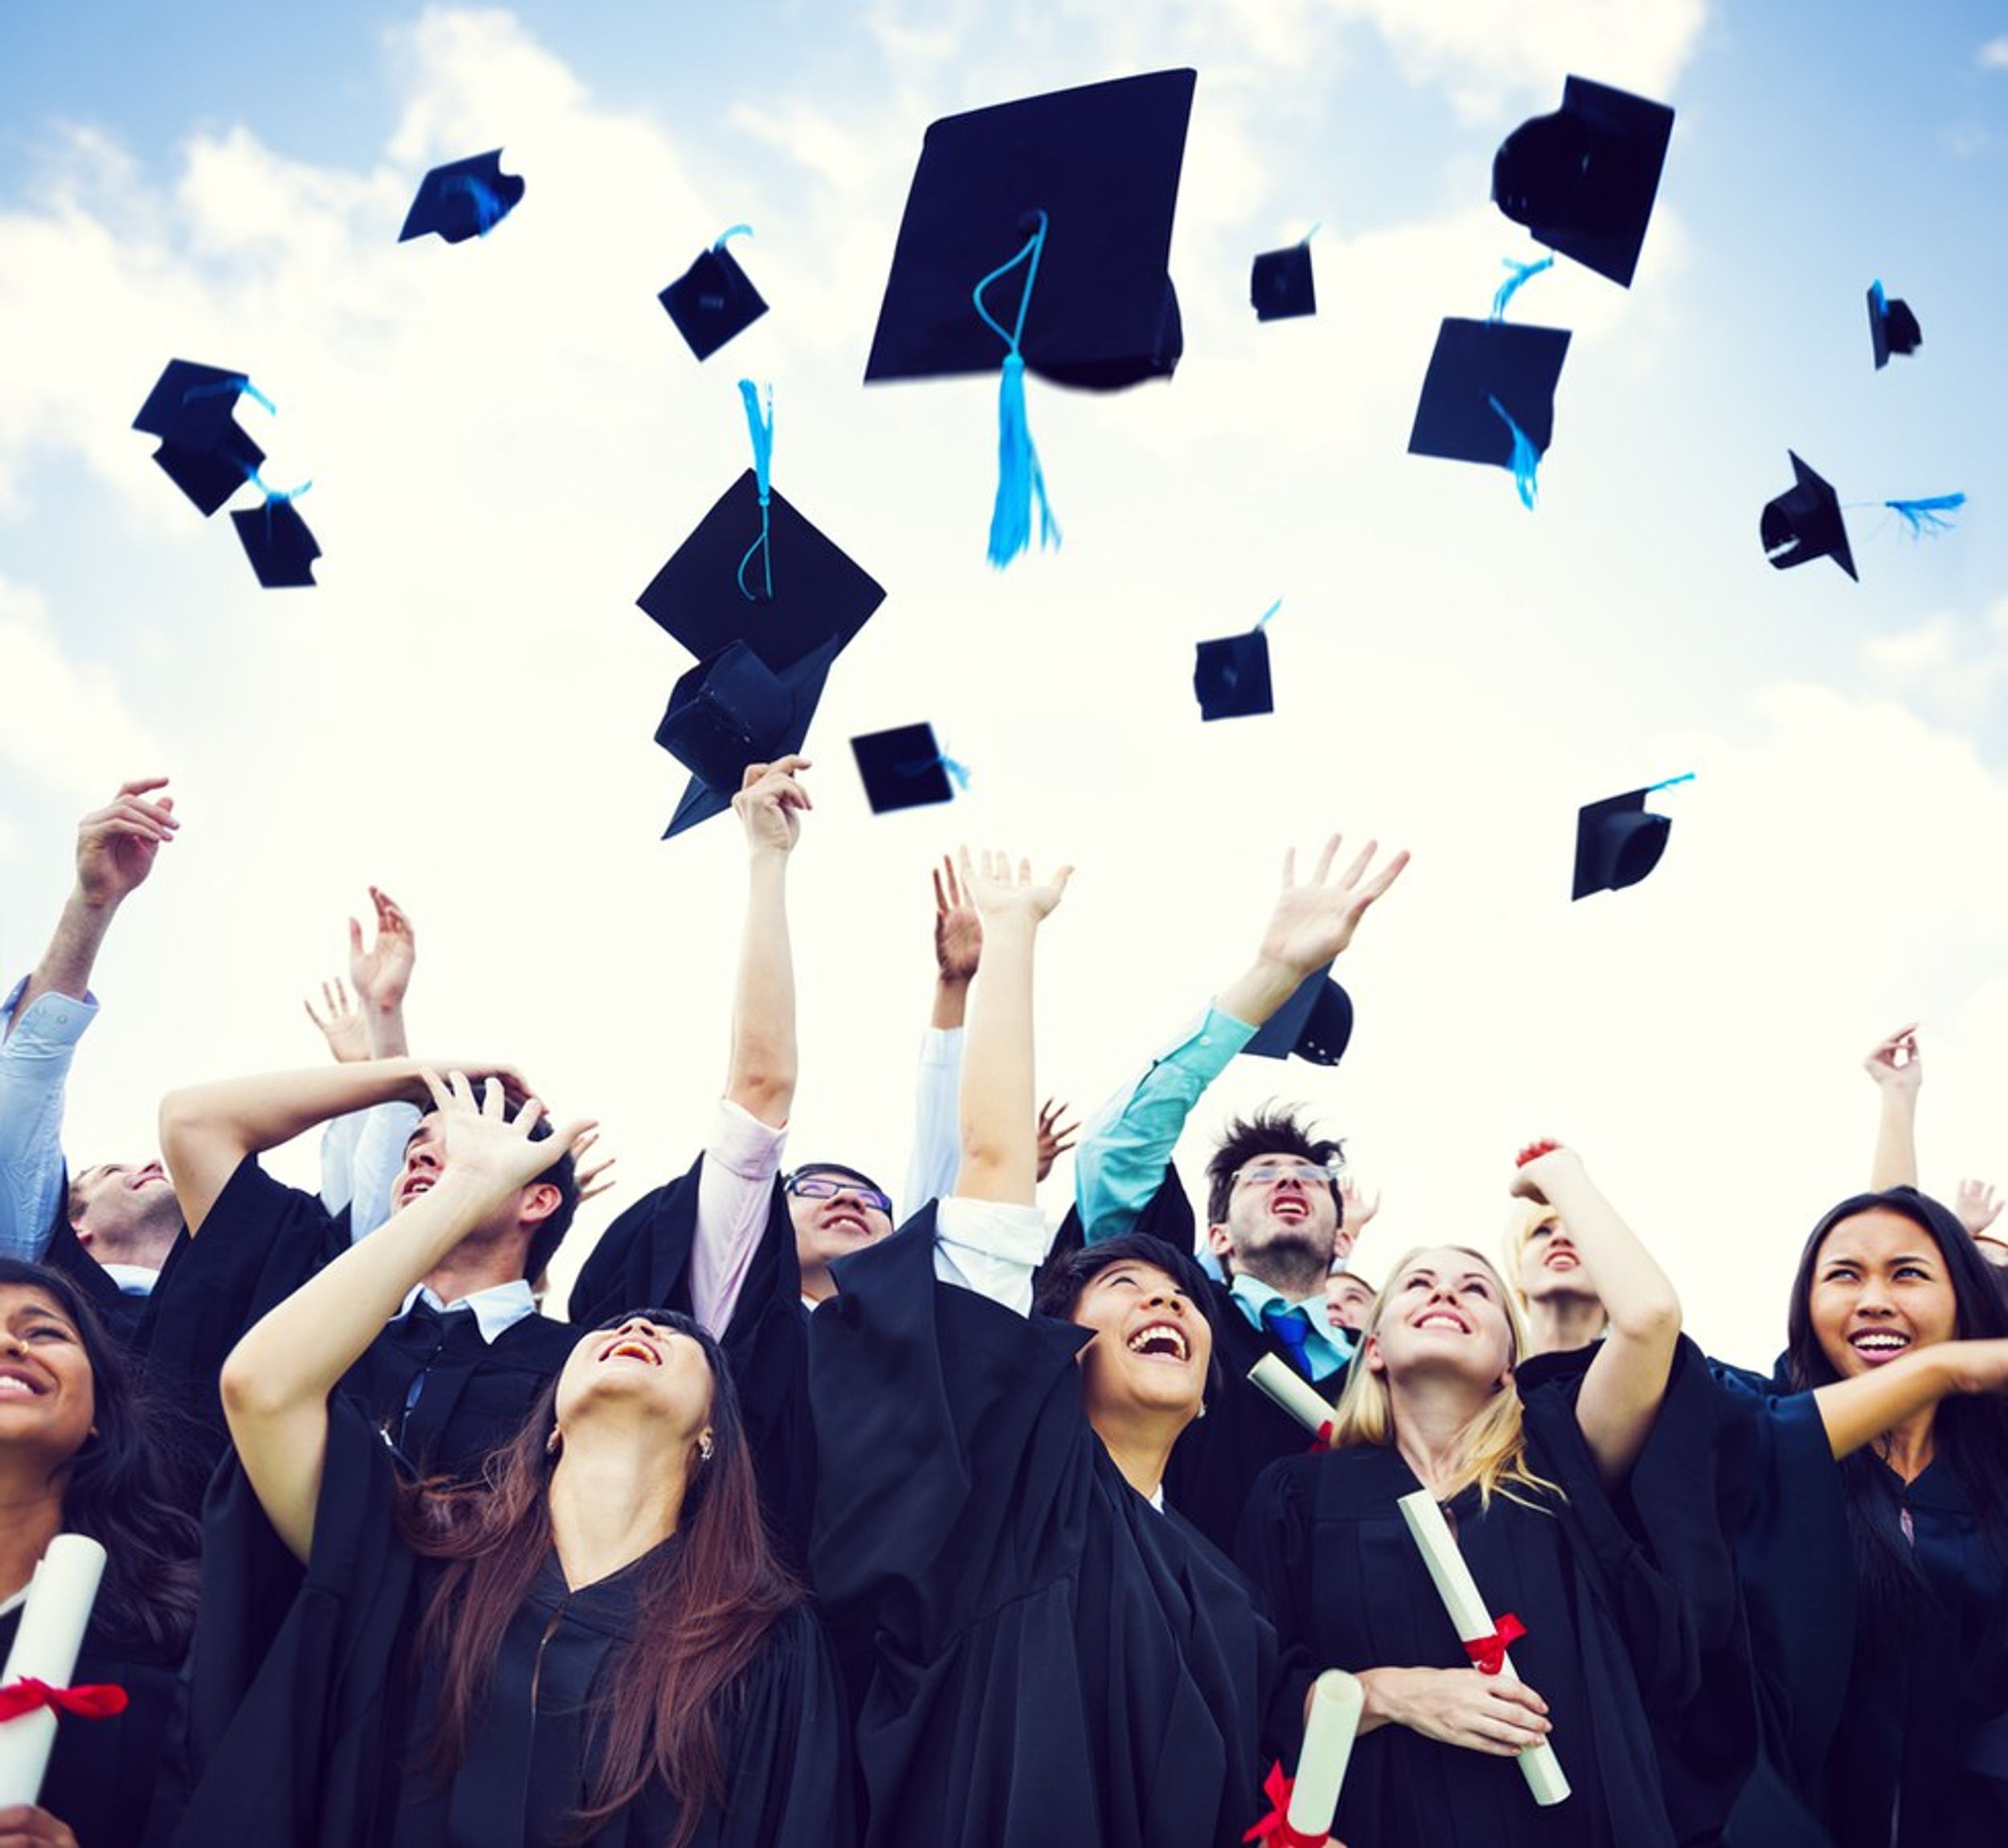 10 Quotes Every Graduating Senior Should Live By